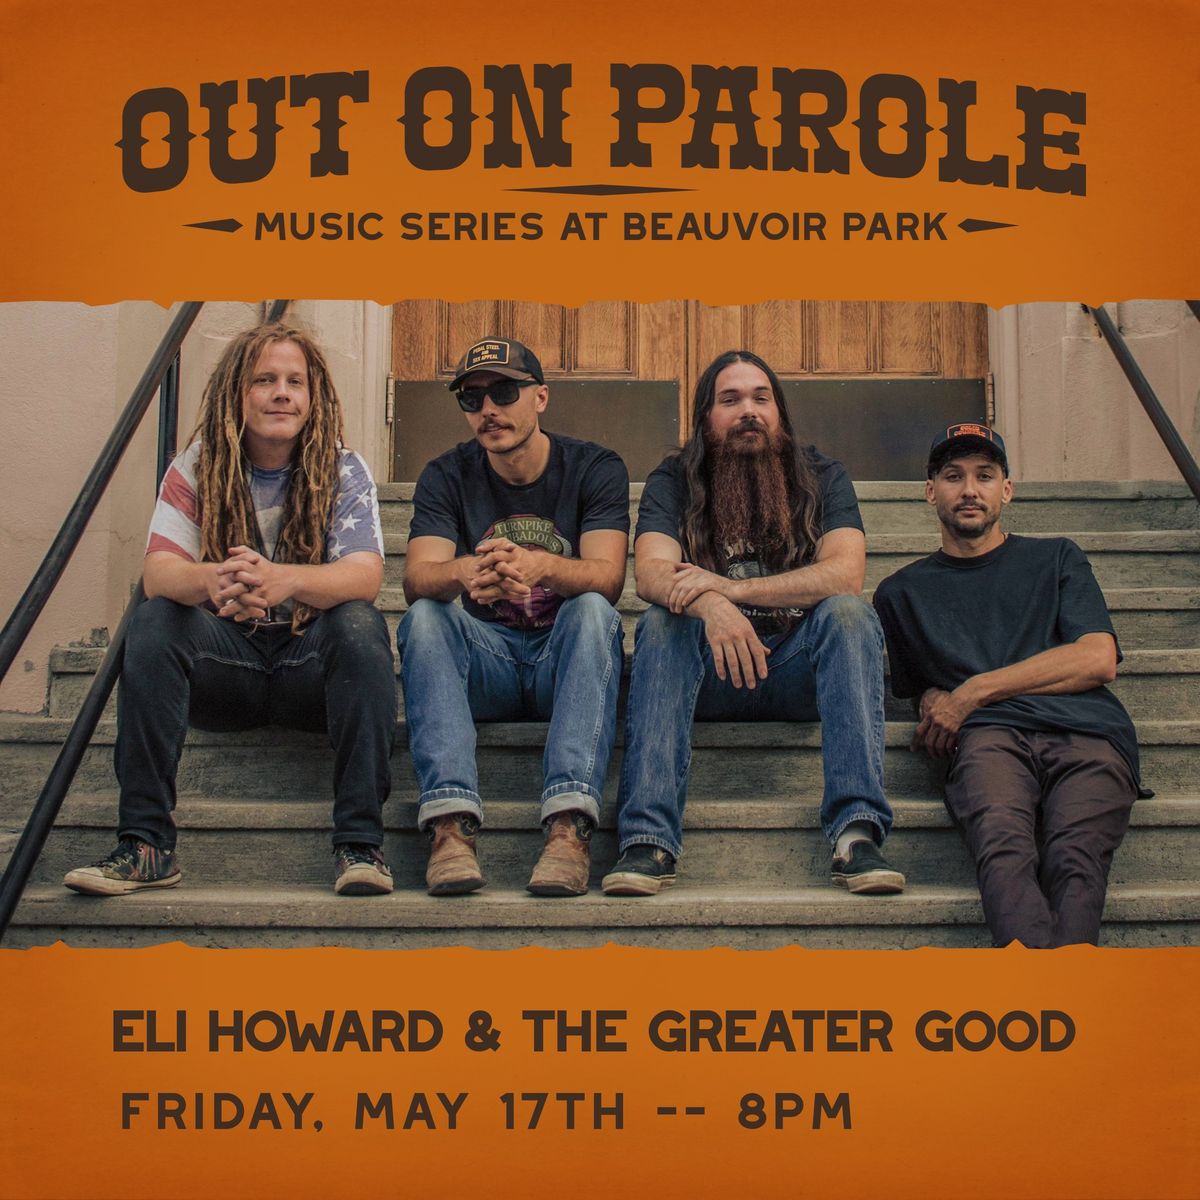 Federales Fest presents 'Out on Parole' with Eli Howard & The Greater Good at Beauvoir Park!